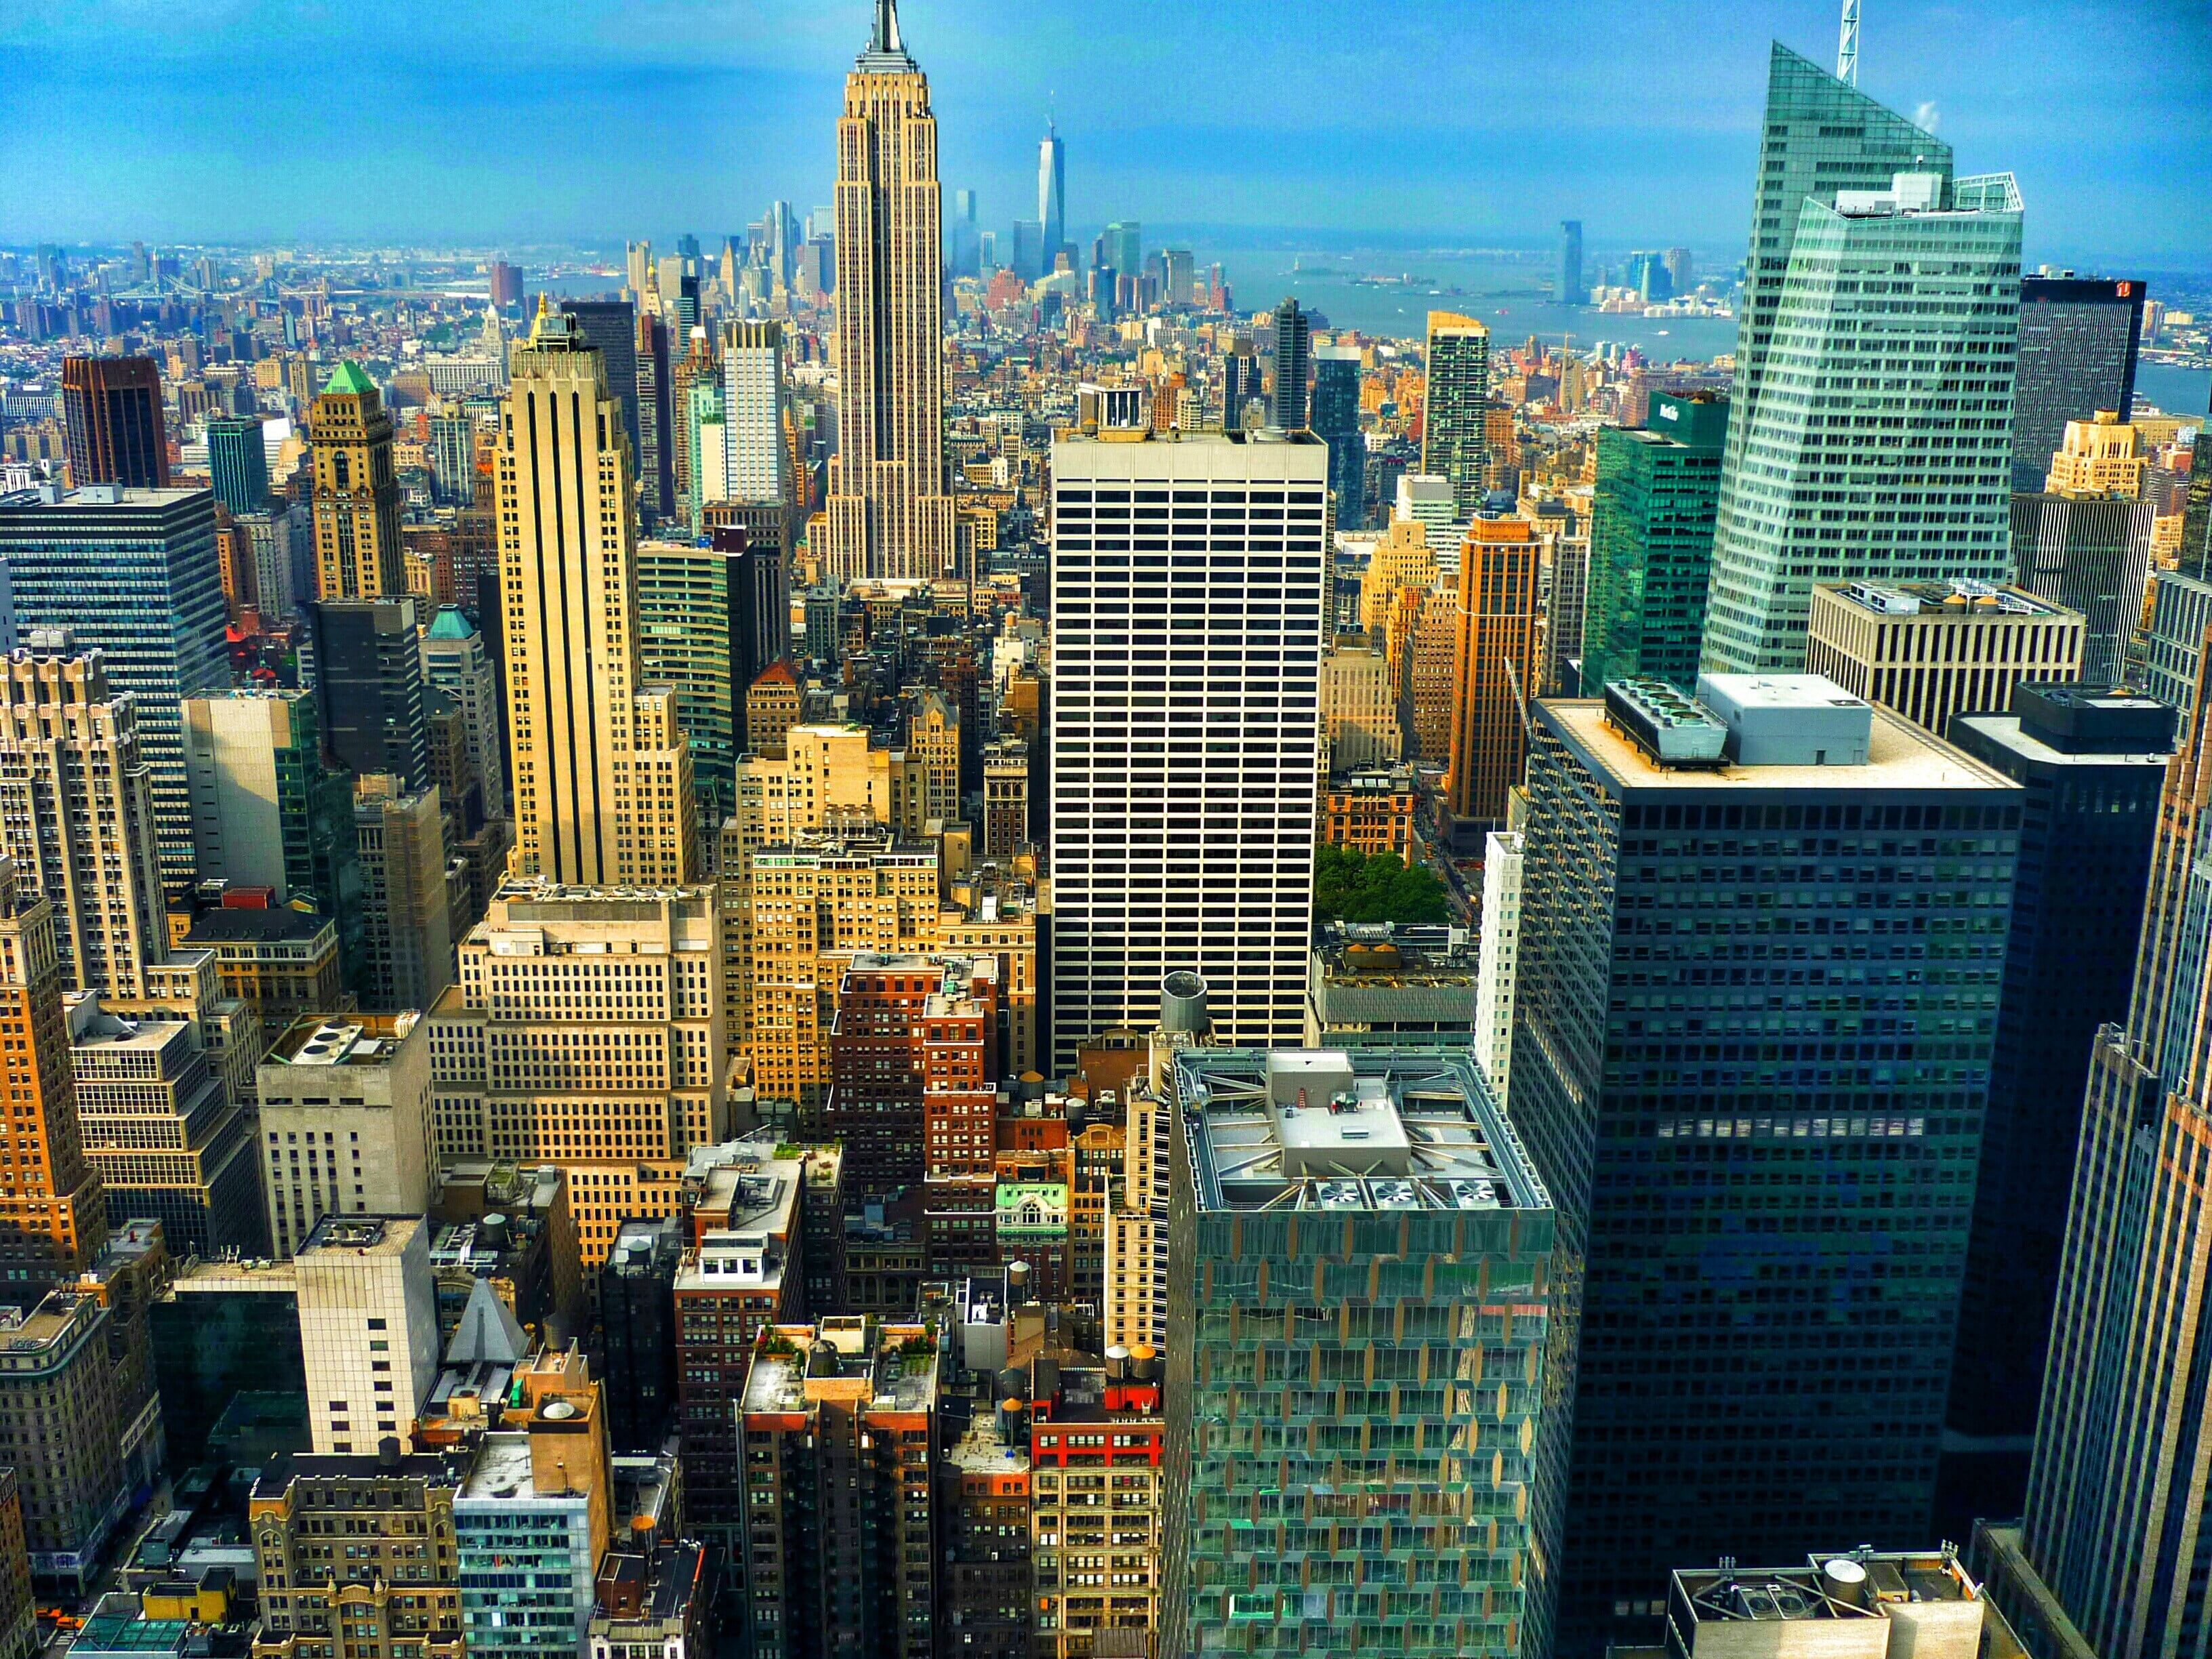 aerial view of high-rise buildings, New York City, Empire State Building